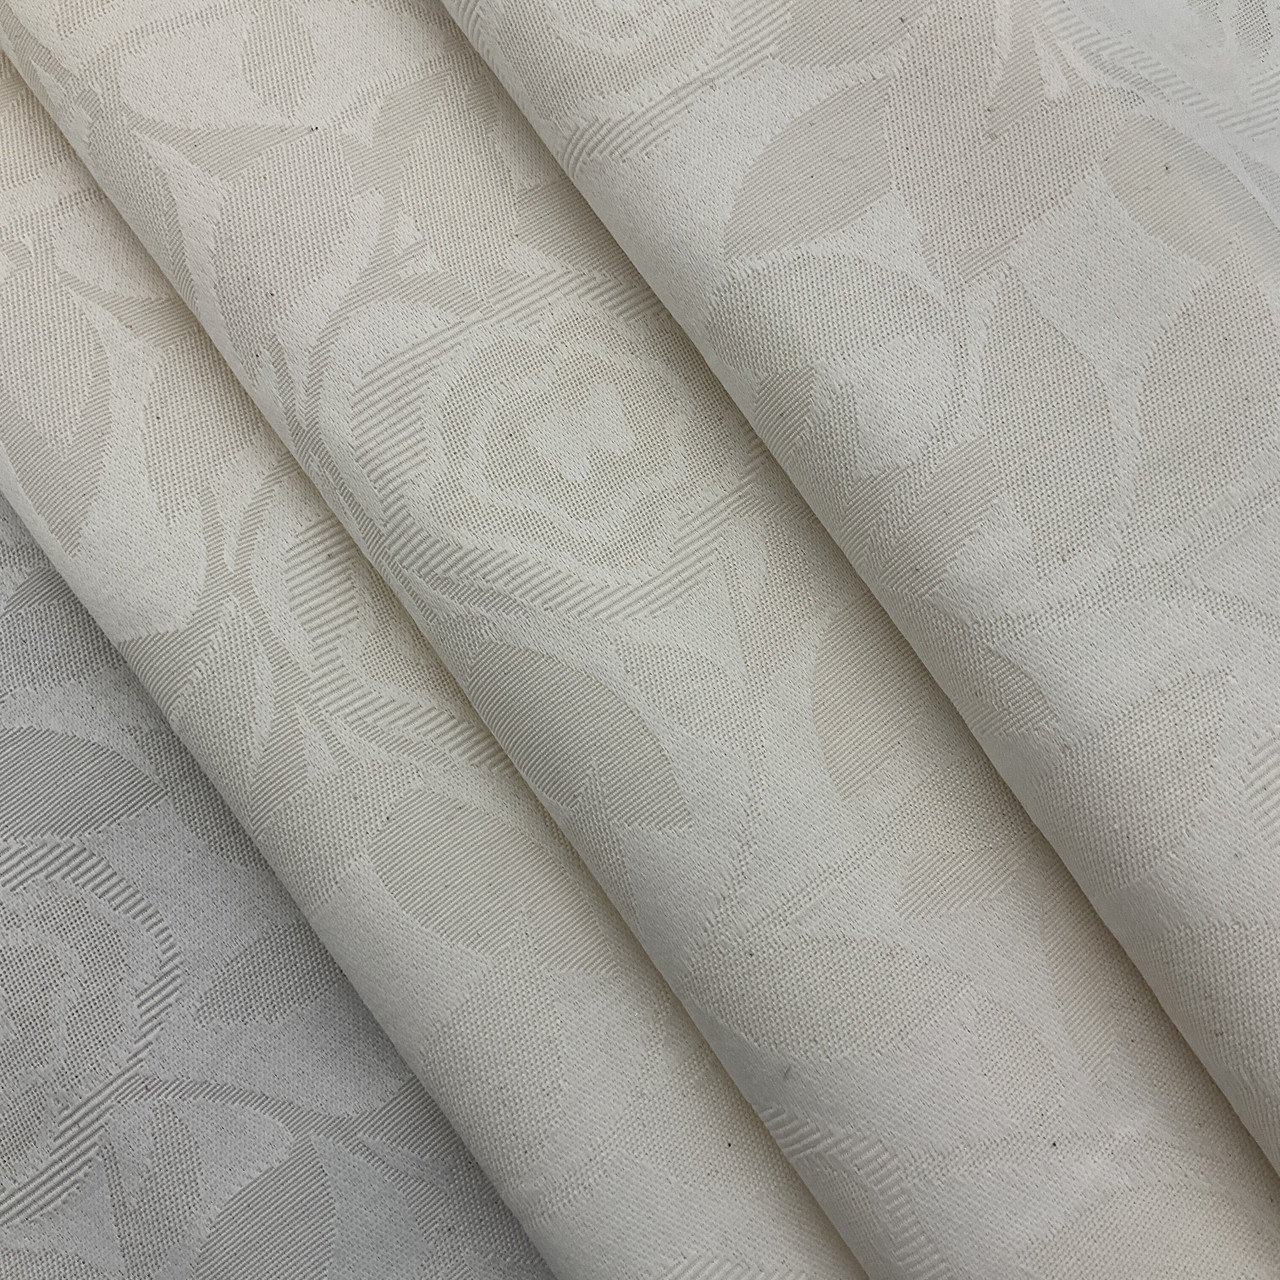 IVORY Striped Brocade Upholstery Drapery Fabric (110 in.) Sold By The –  handtfabrics